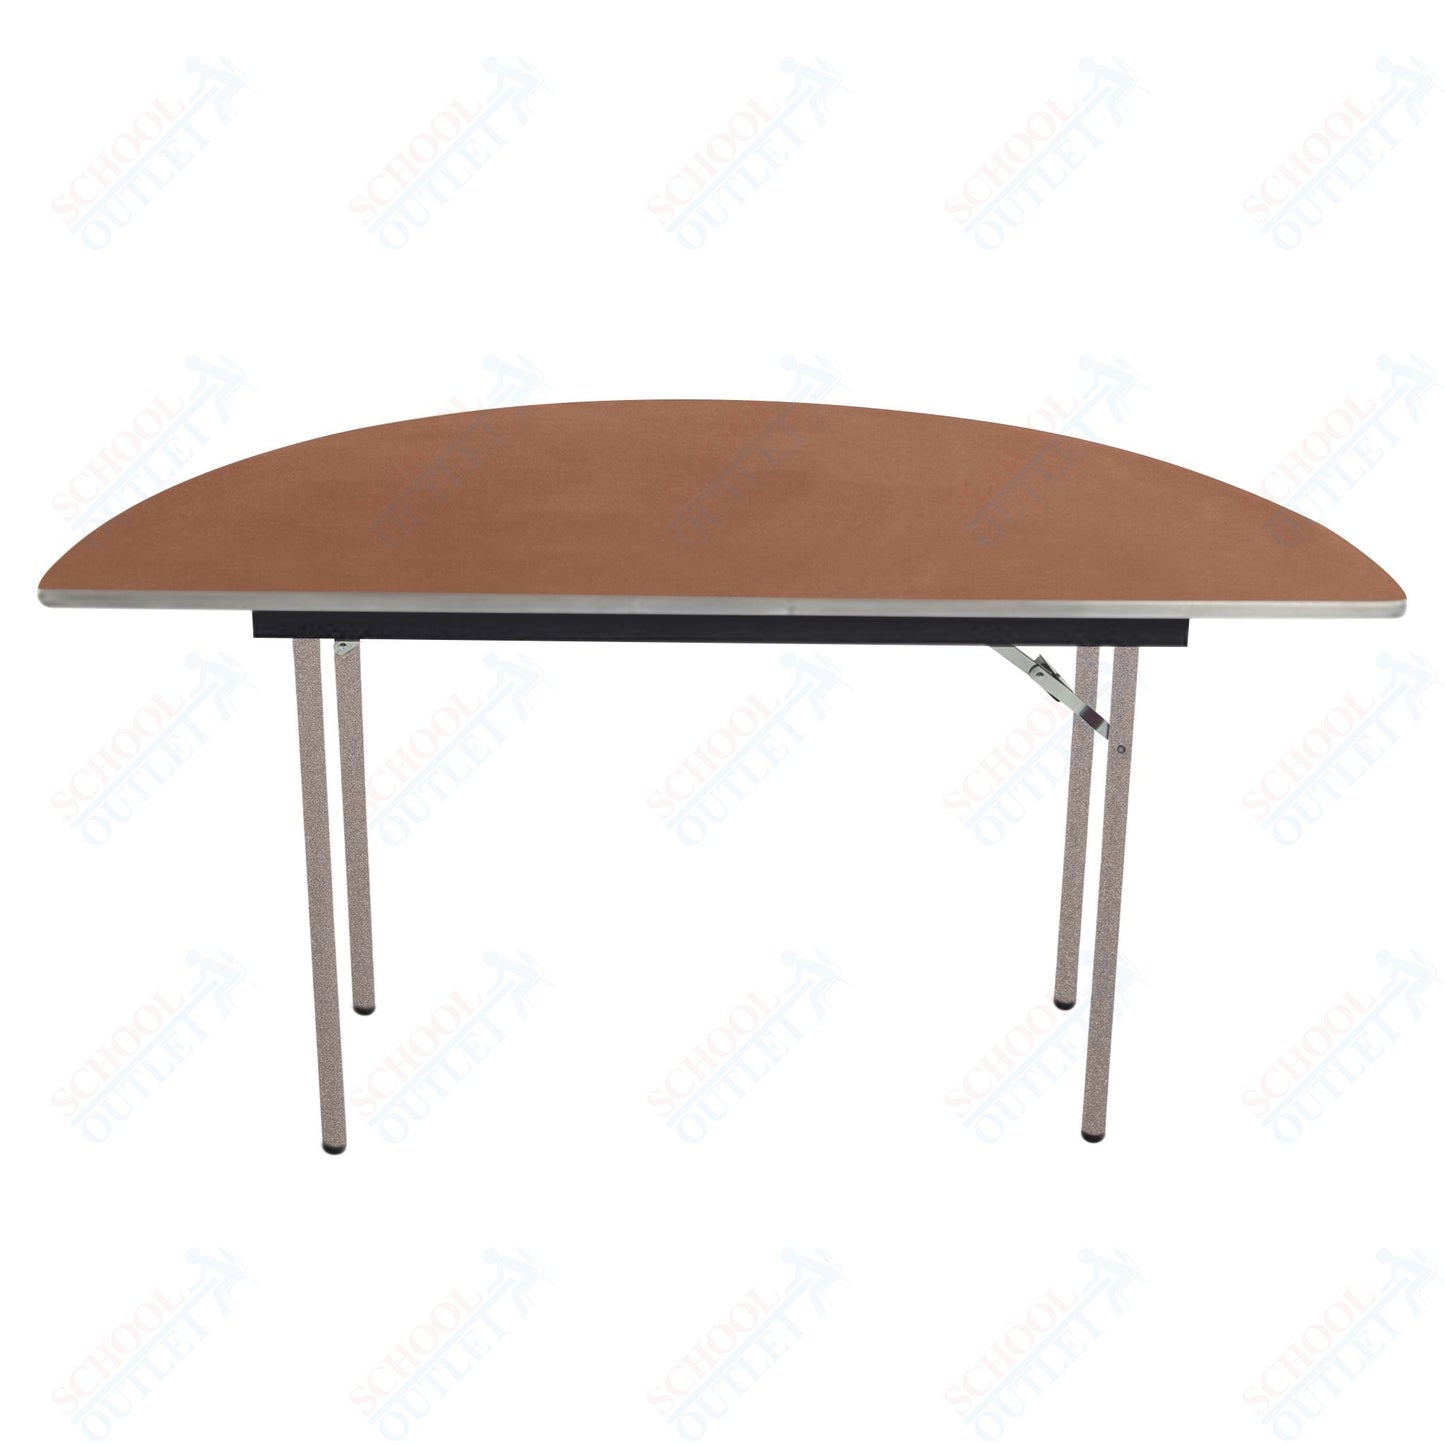 AmTab Folding Table - Plywood Stained and Sealed - Aluminum Edge - Half Round - Half 30" Diameter x 29"H (AmTab AMT - HR30PA) - SchoolOutlet